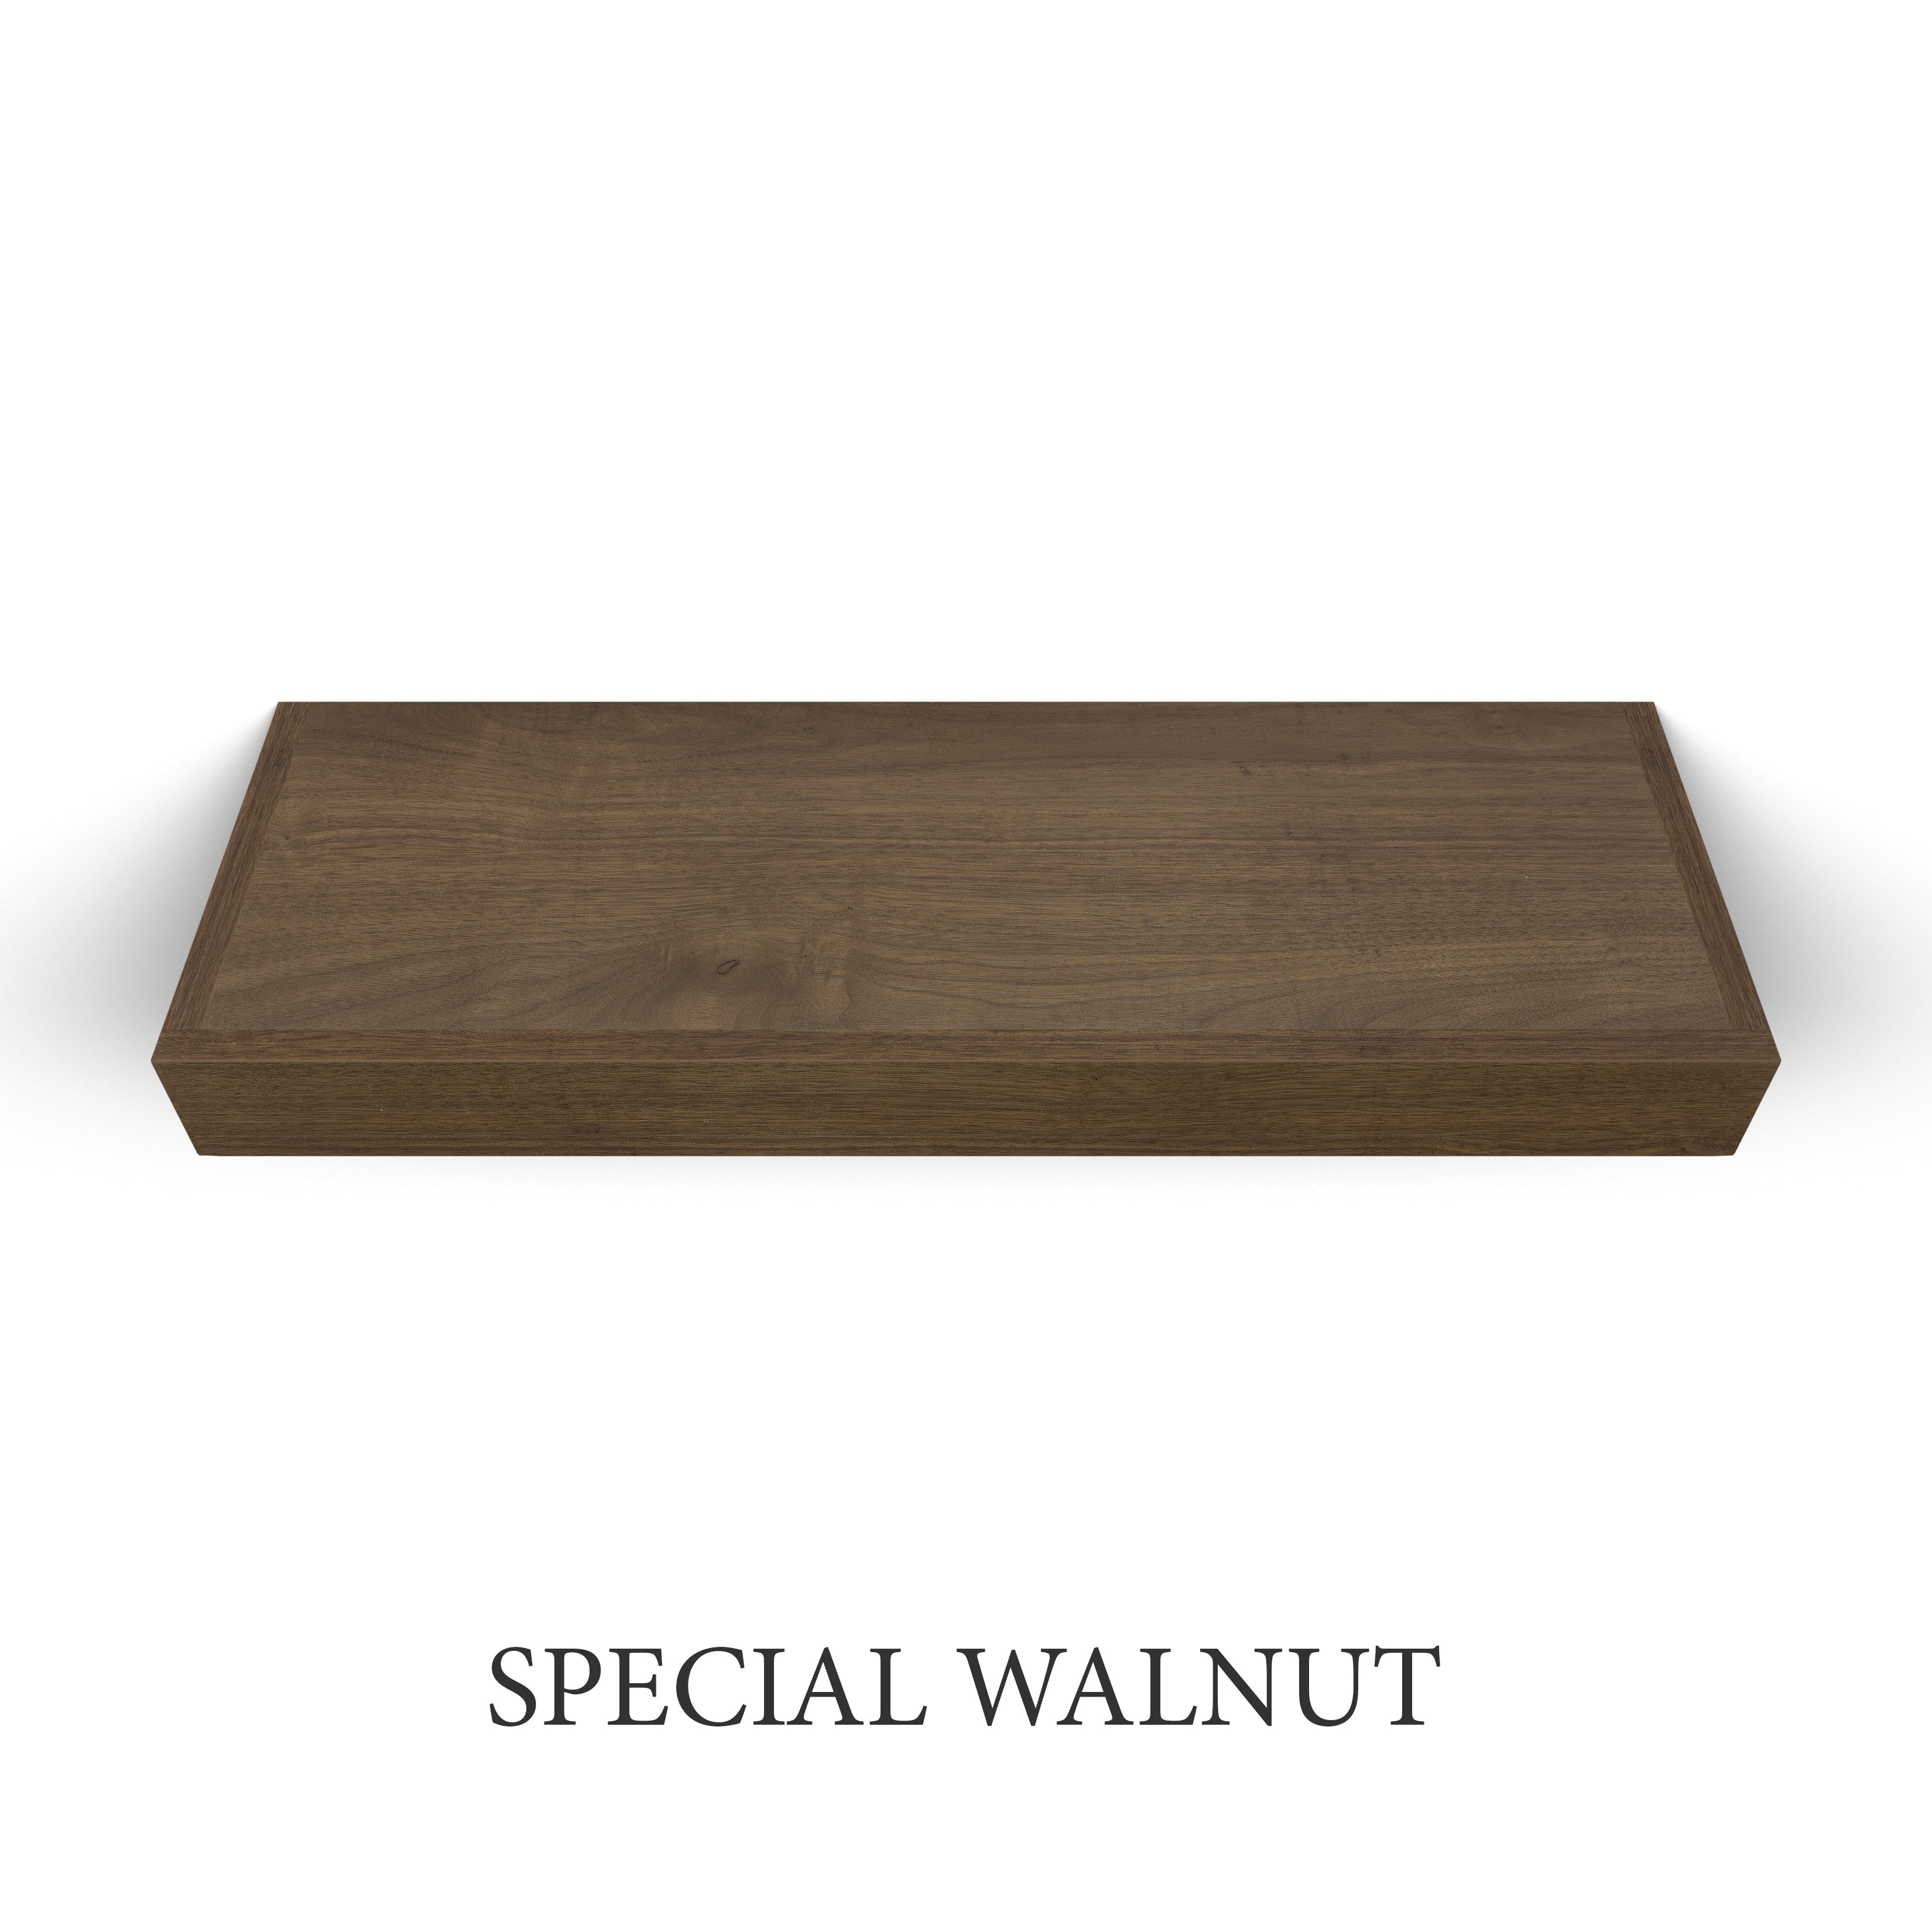 special walnut Walnut 3 Inch Thick LED Lighted Floating Shelf - Hardwired